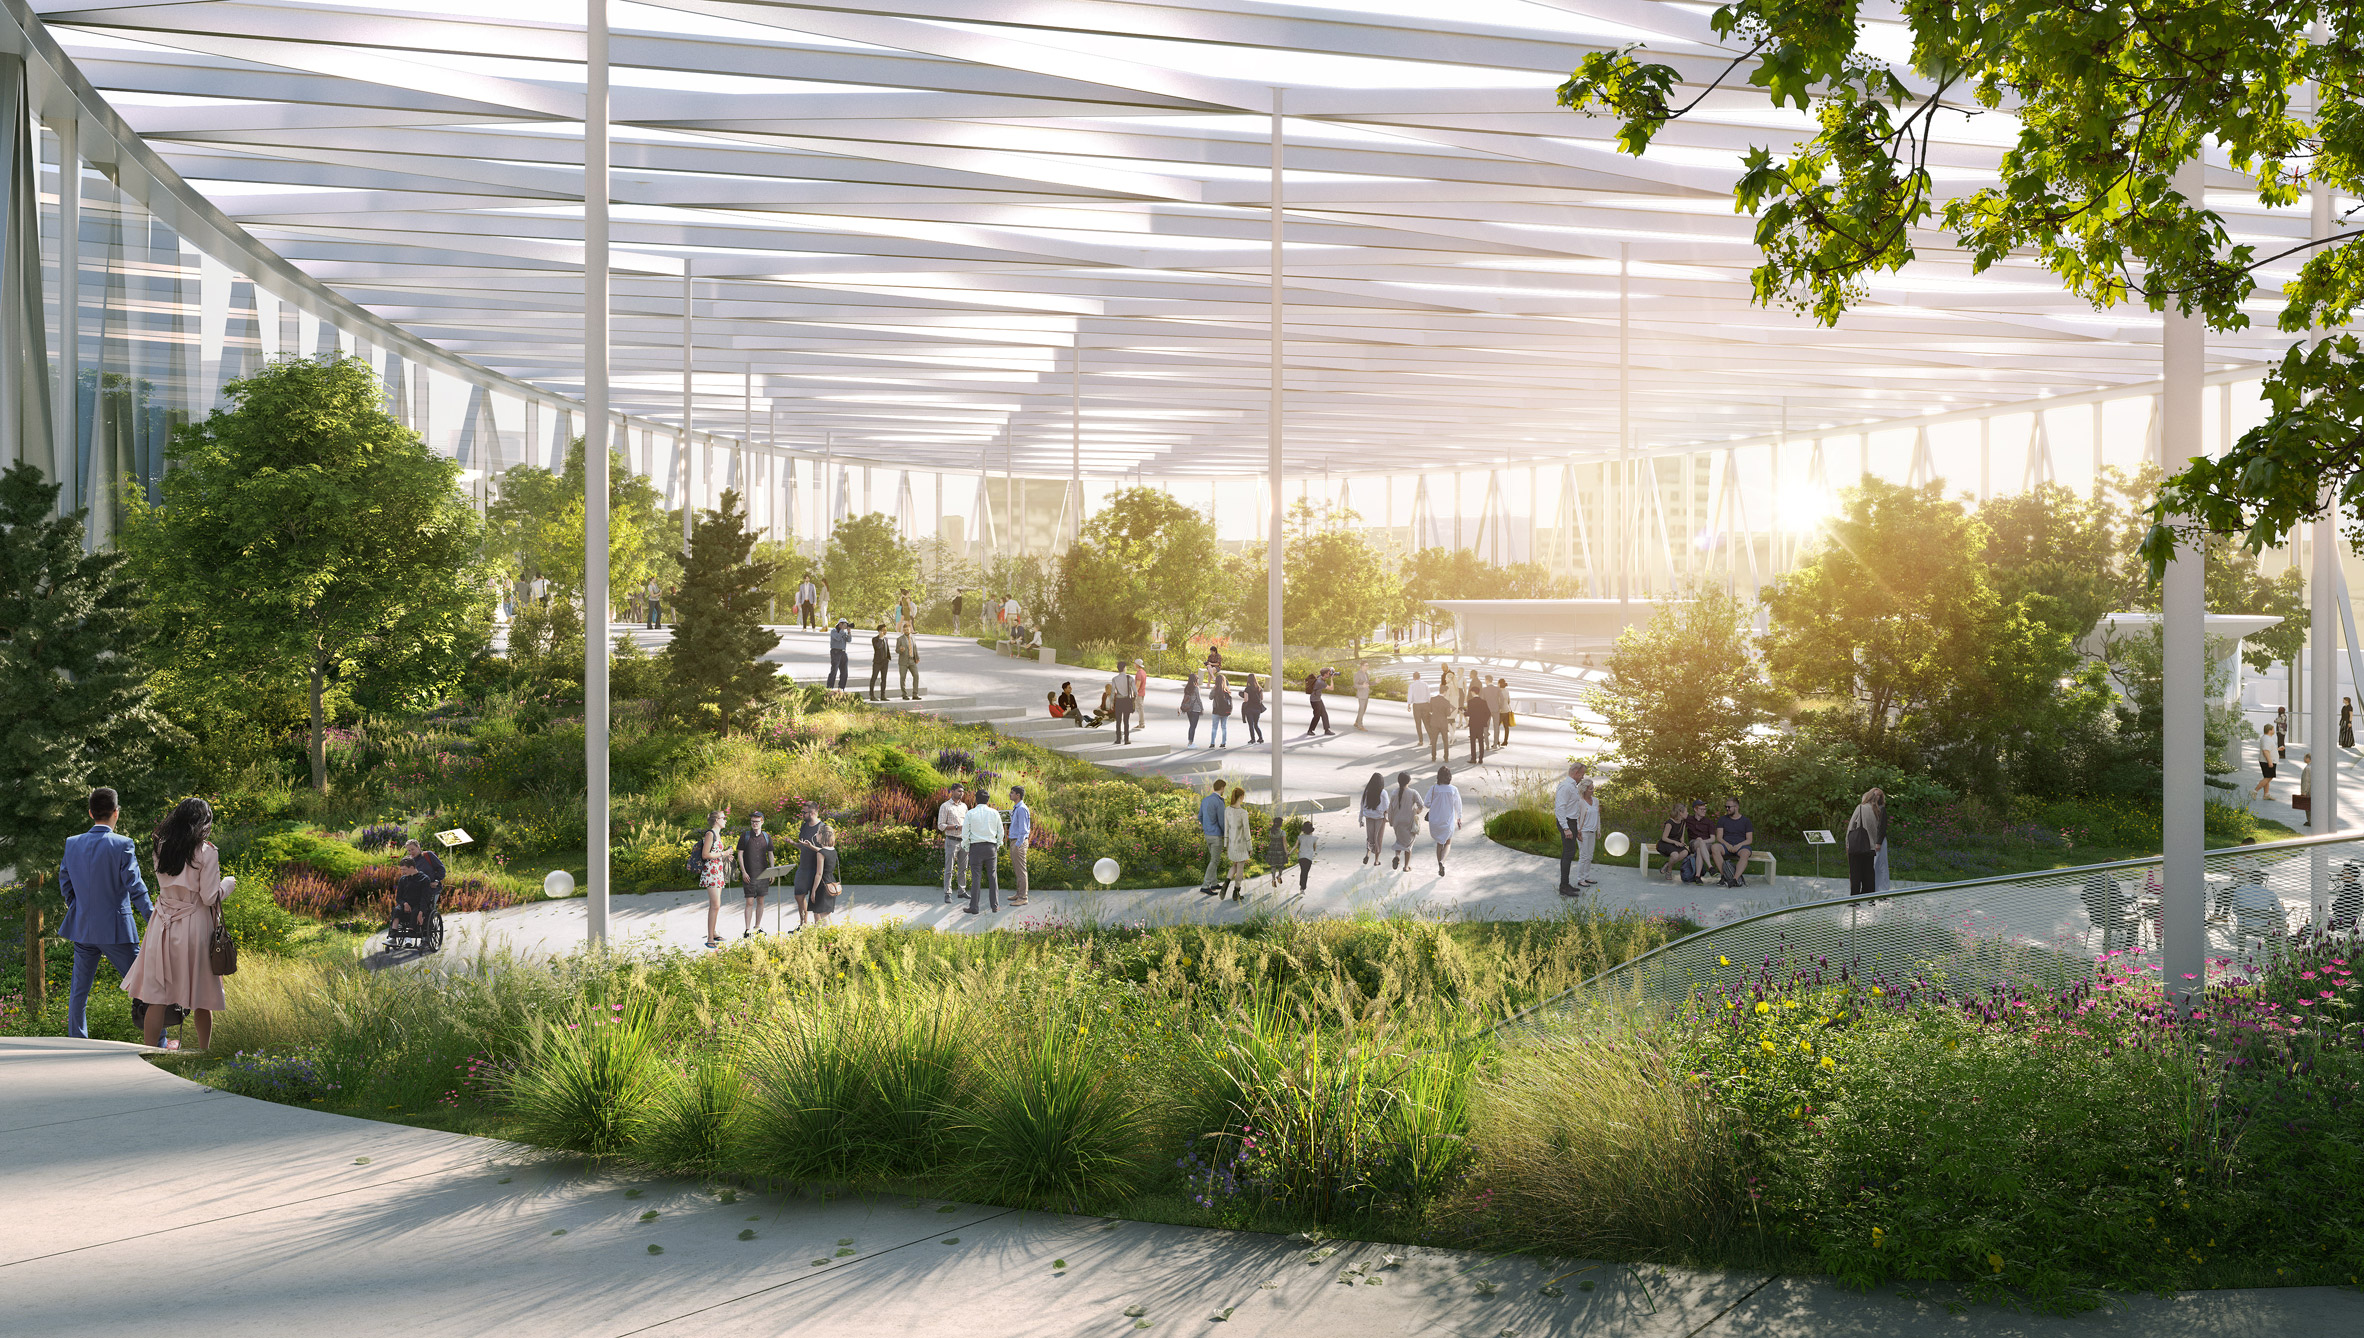 Render of the rooftop botanical garden at the European Parliament building